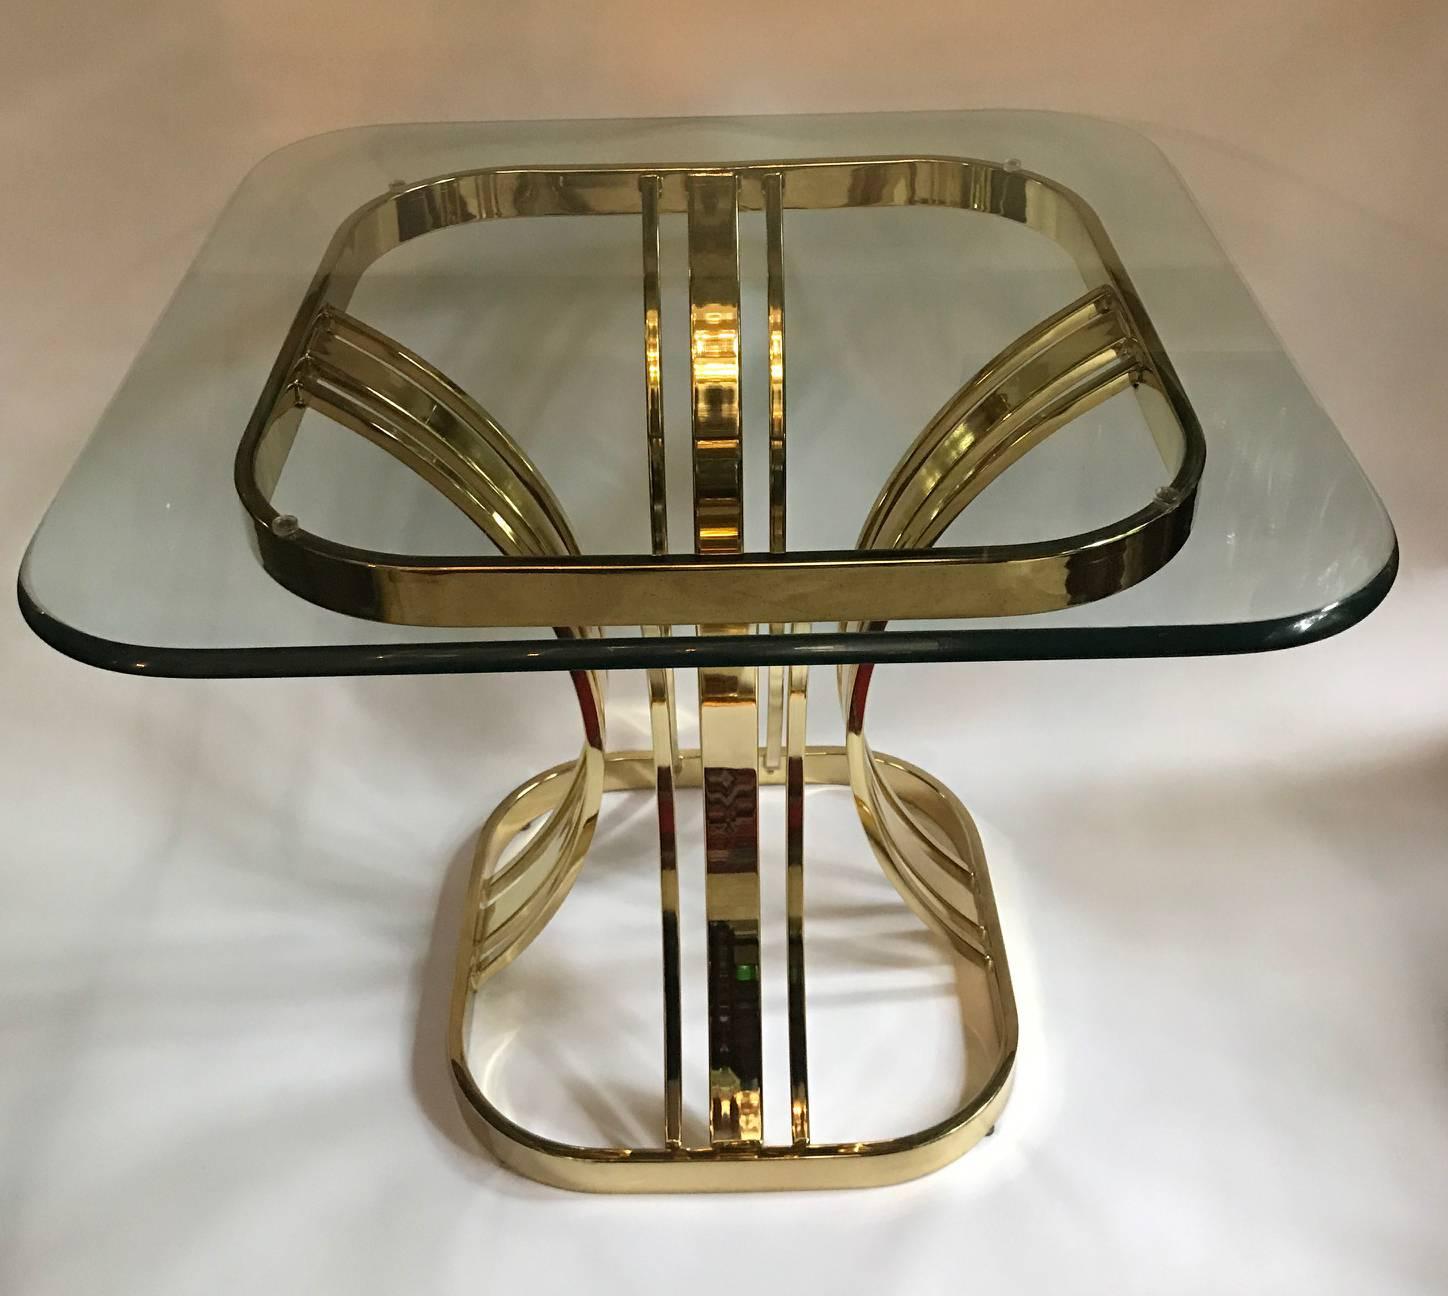 Pair of Moderne style 1960's Italian side tables with glass tops.

Measurements:
Height: 23.5